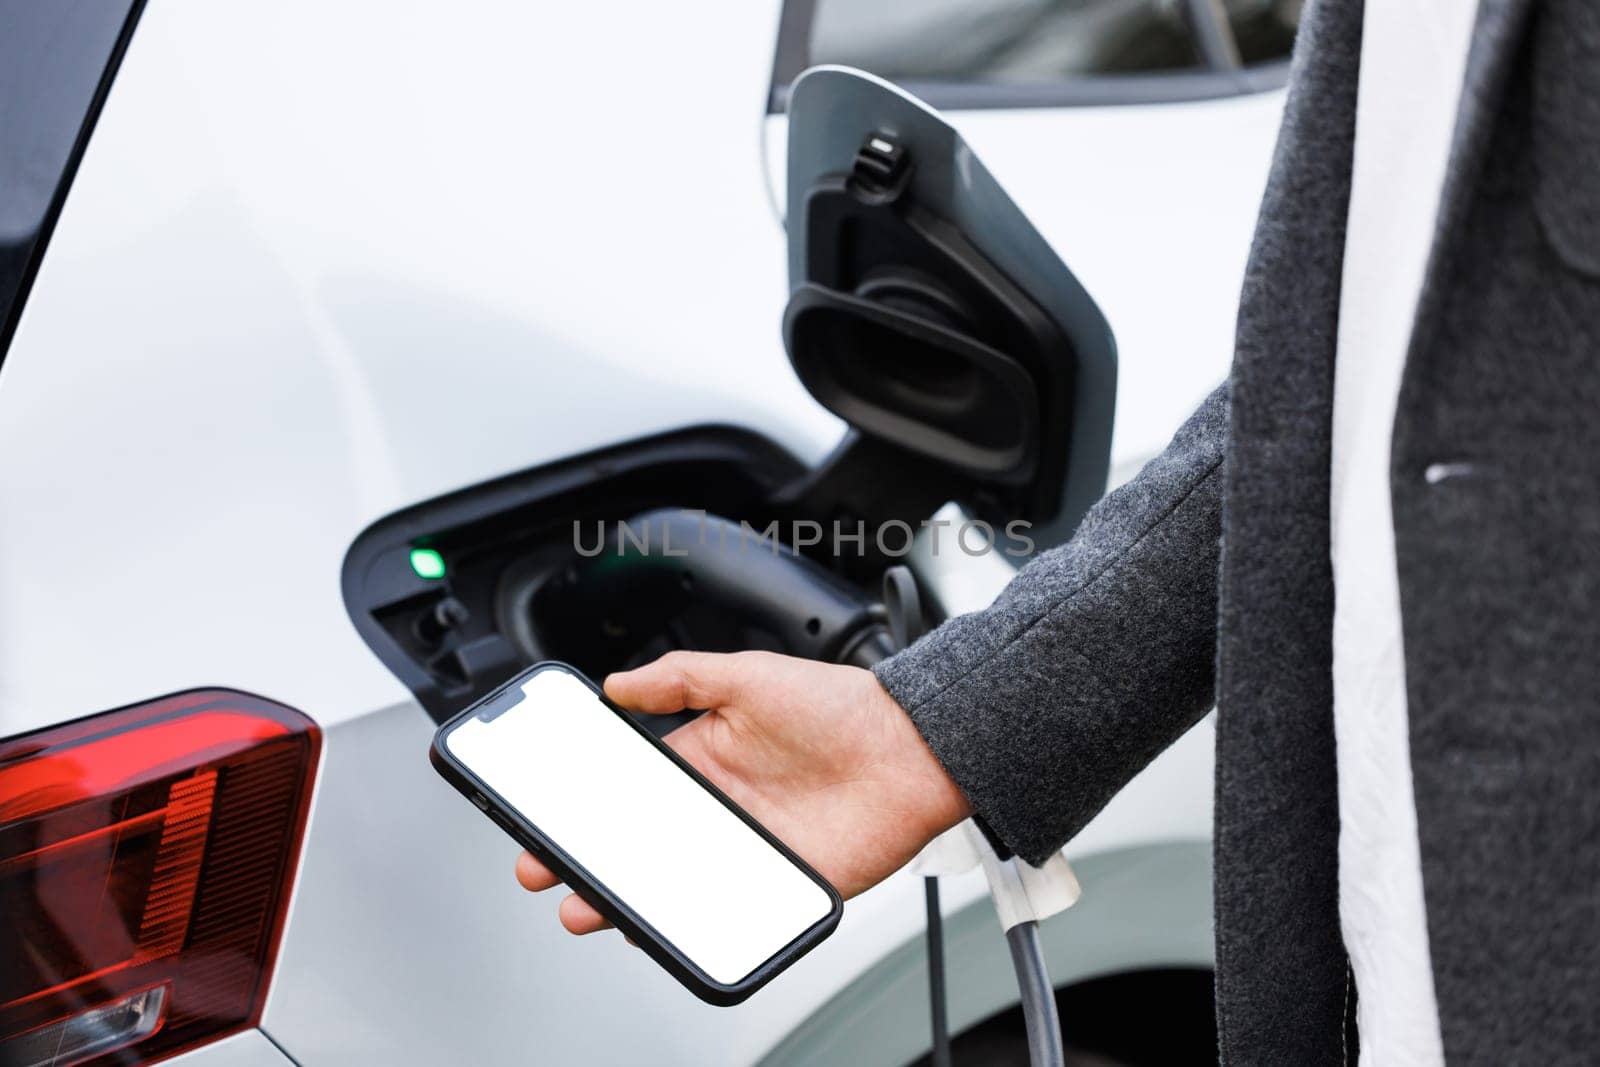 Smartphone monitoring of charging. Young man with her electric car at daytime. Man holding smartphone while charging car at electric vehicle charging station, closeup.